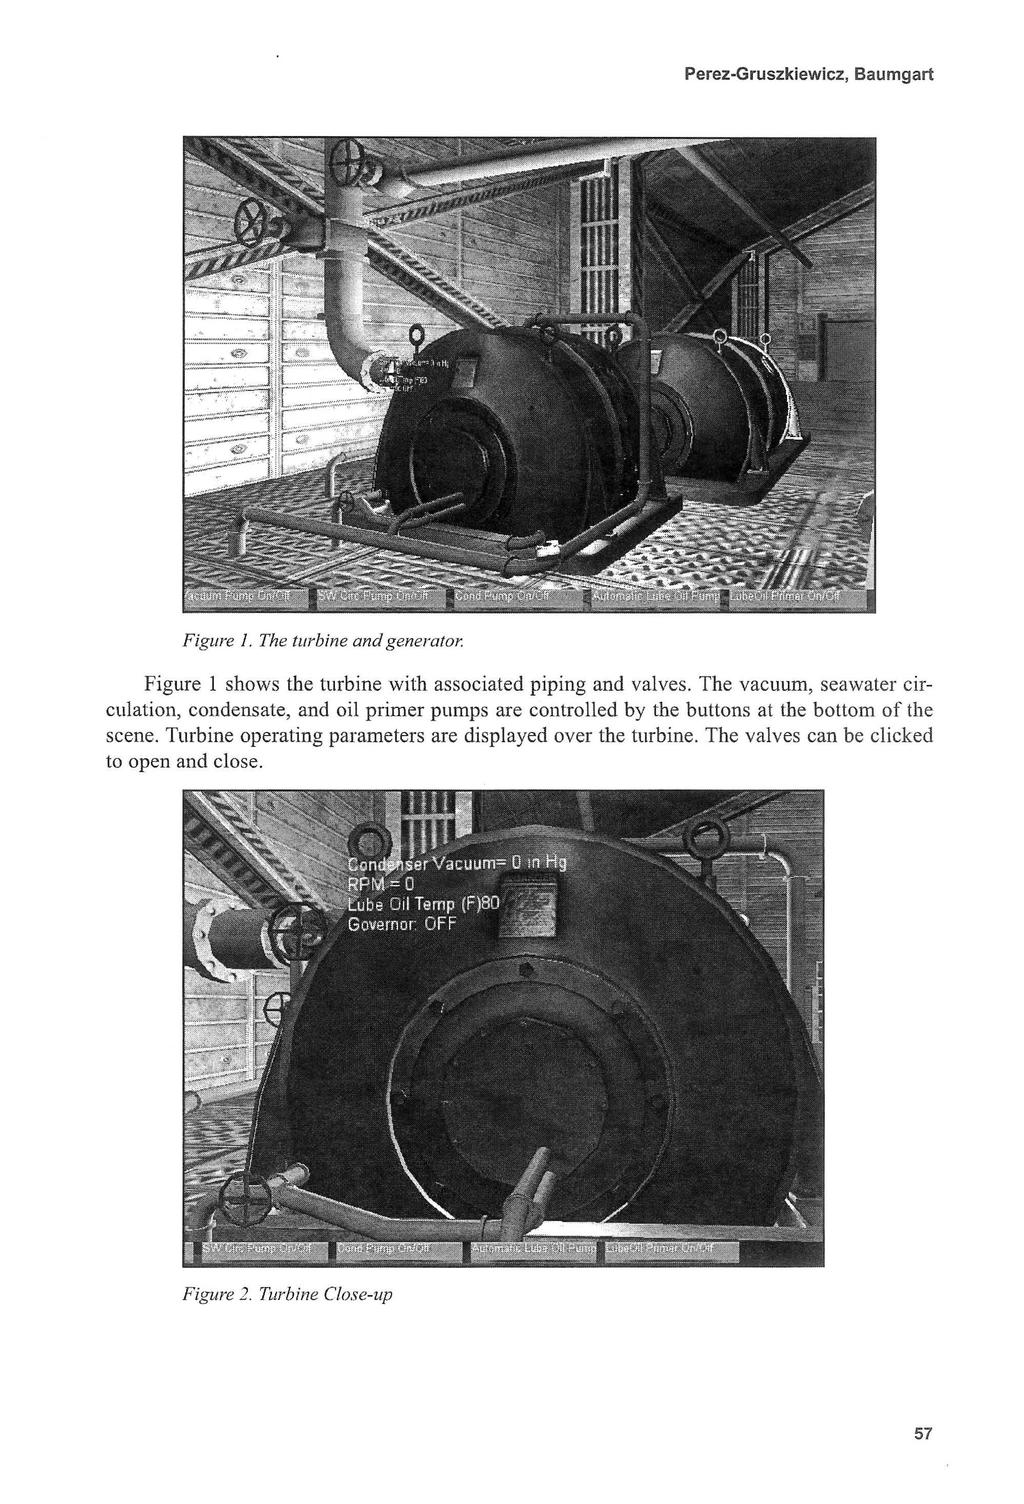 Perez-Gruszkiewicz, Baumgart Figure I. The turbine and generator. Figure 1 shows the turbine with associated piping and valves.